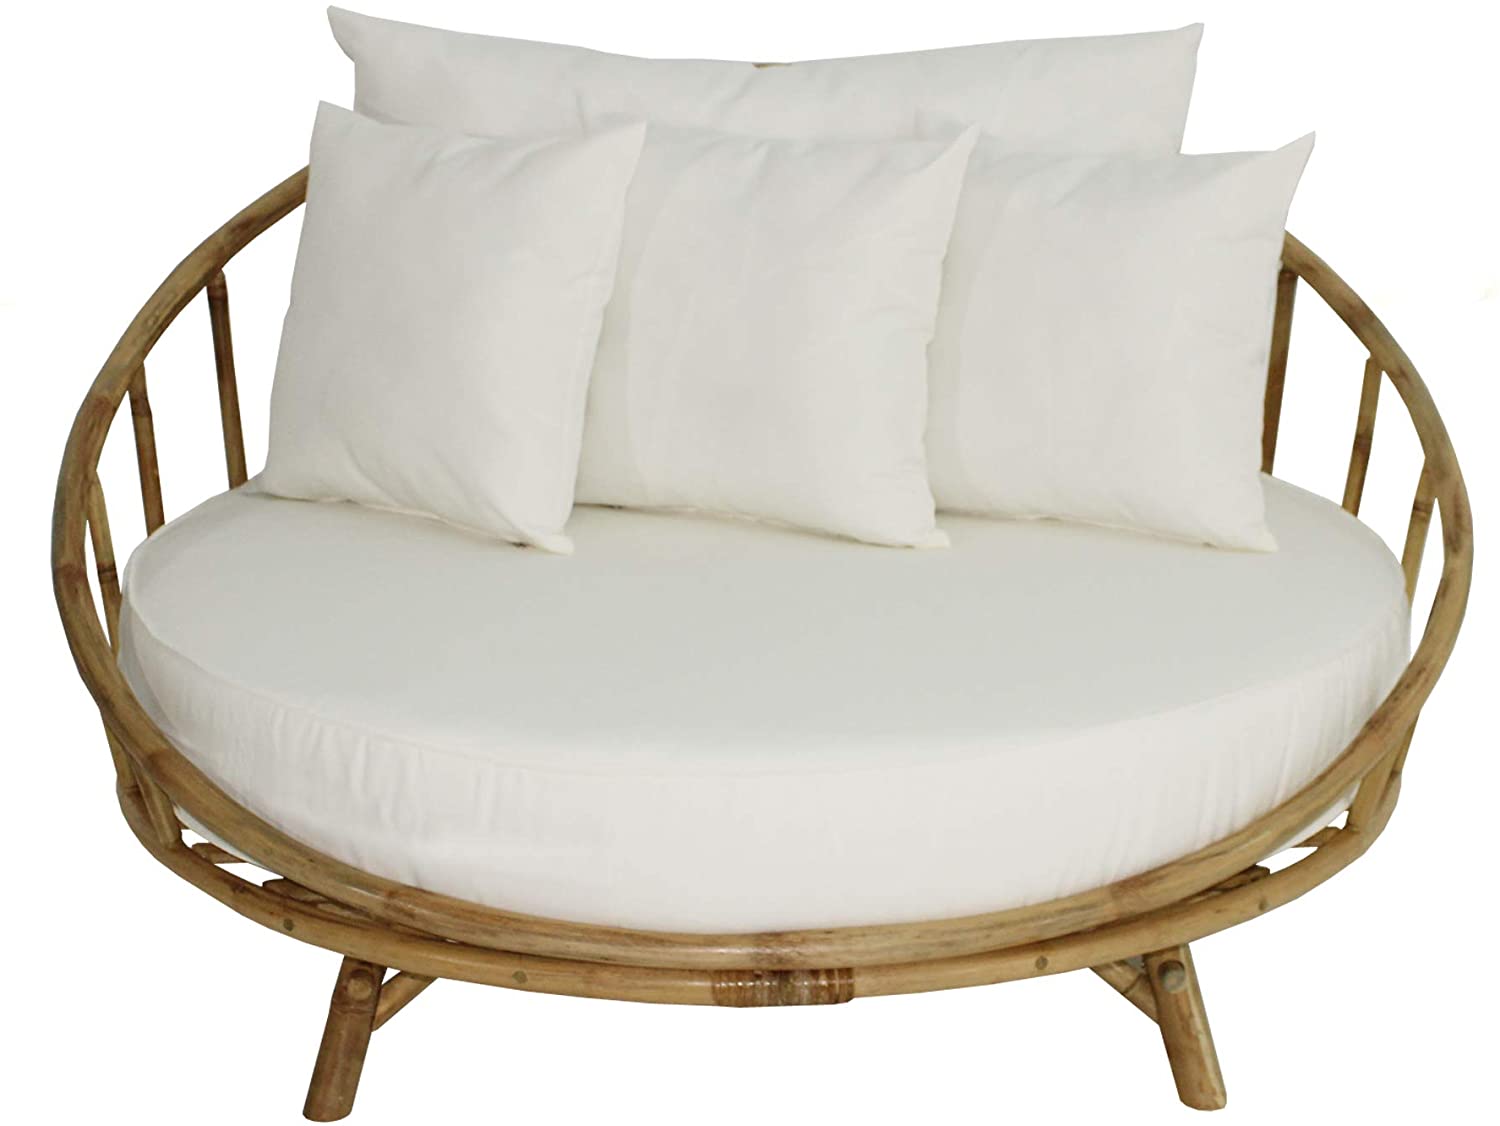 ZEW Bamboo Round Patio Daybed